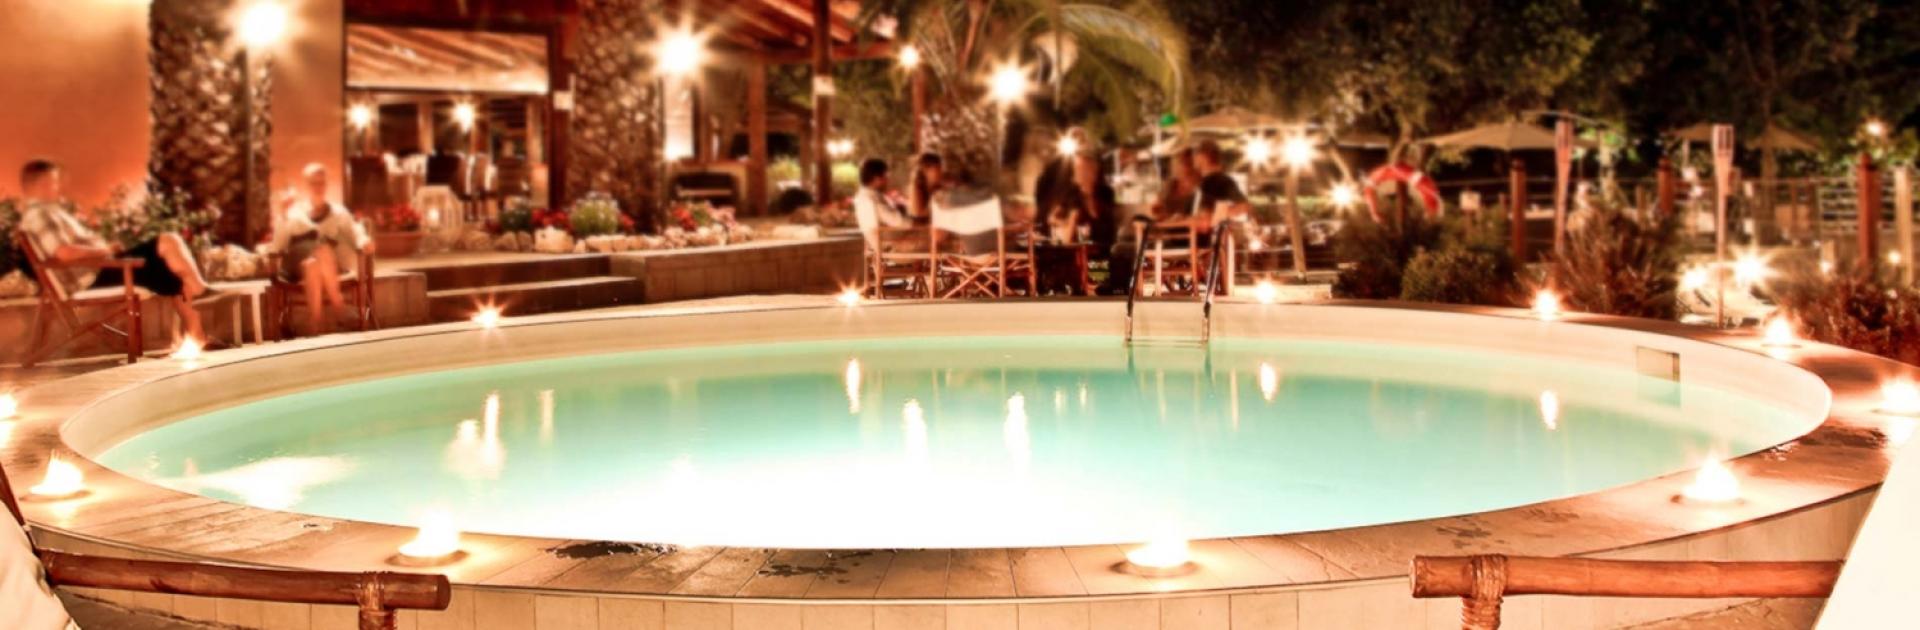 A cozy night poolside with palm trees and ambient lighting.